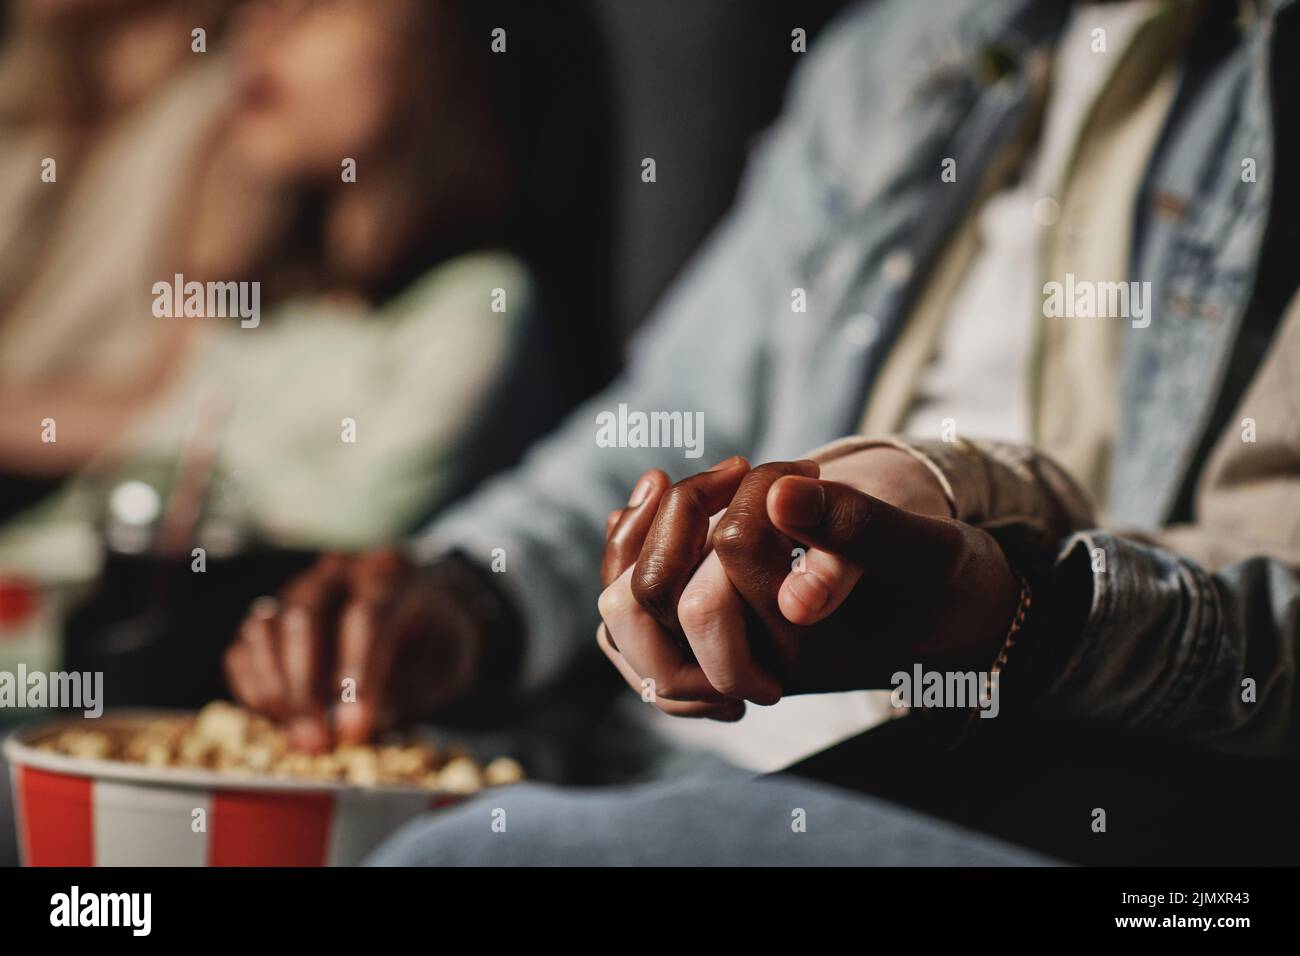 Selective focus of unrecognizable ethnically diverse couple holding hands while watching film at cinema Stock Photo